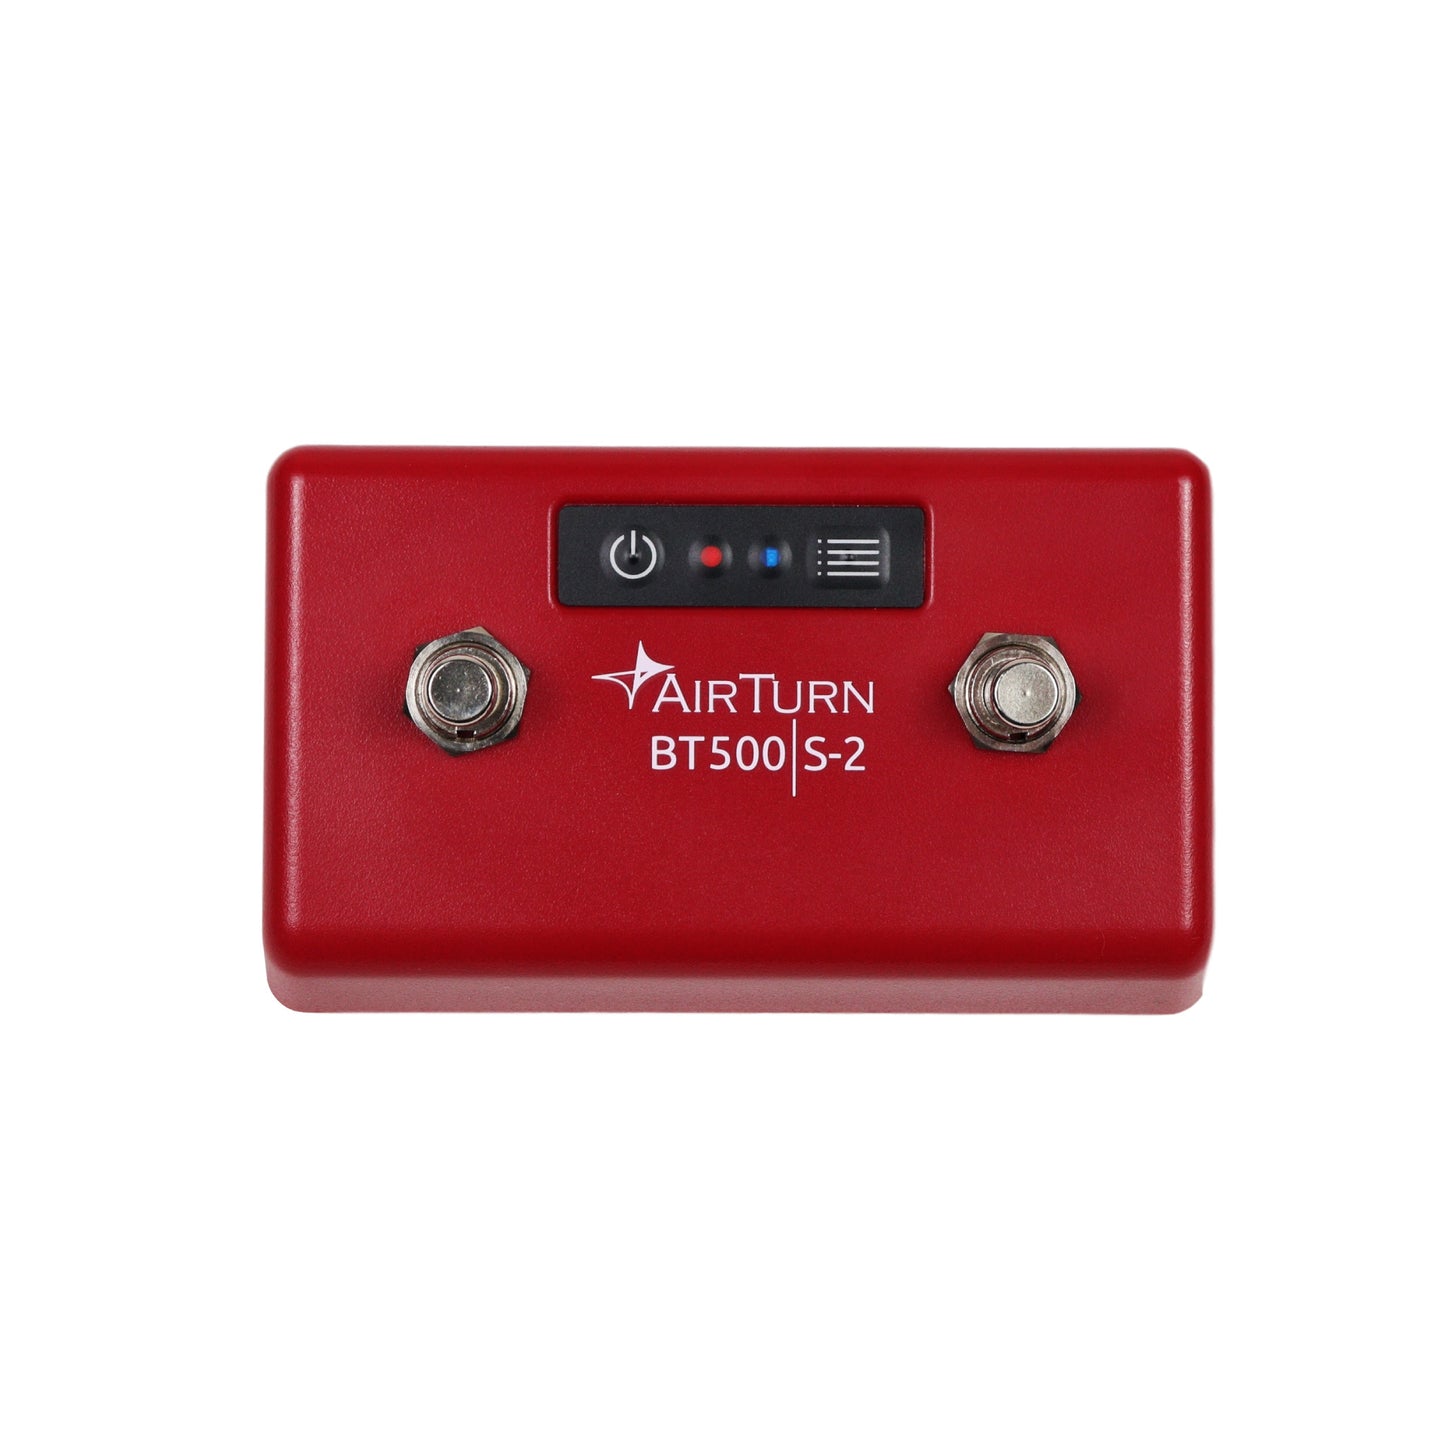 Airturn Bluetooth 5 - 2 Foot Switch Controller